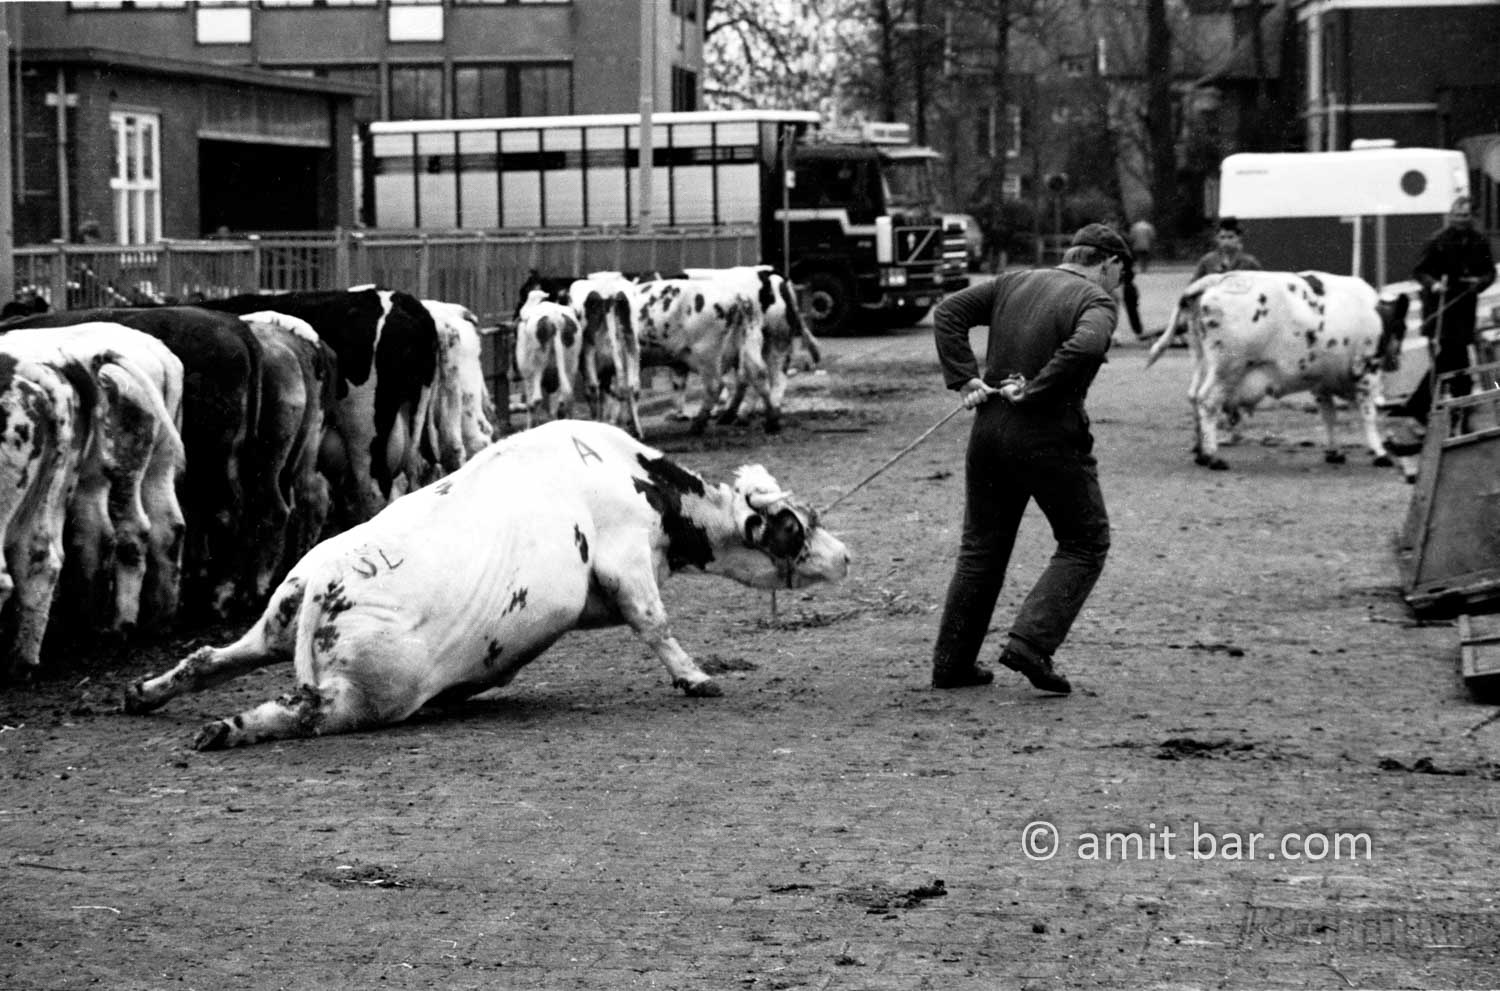 Matador: A cattle market worker is towing a cow who fell down